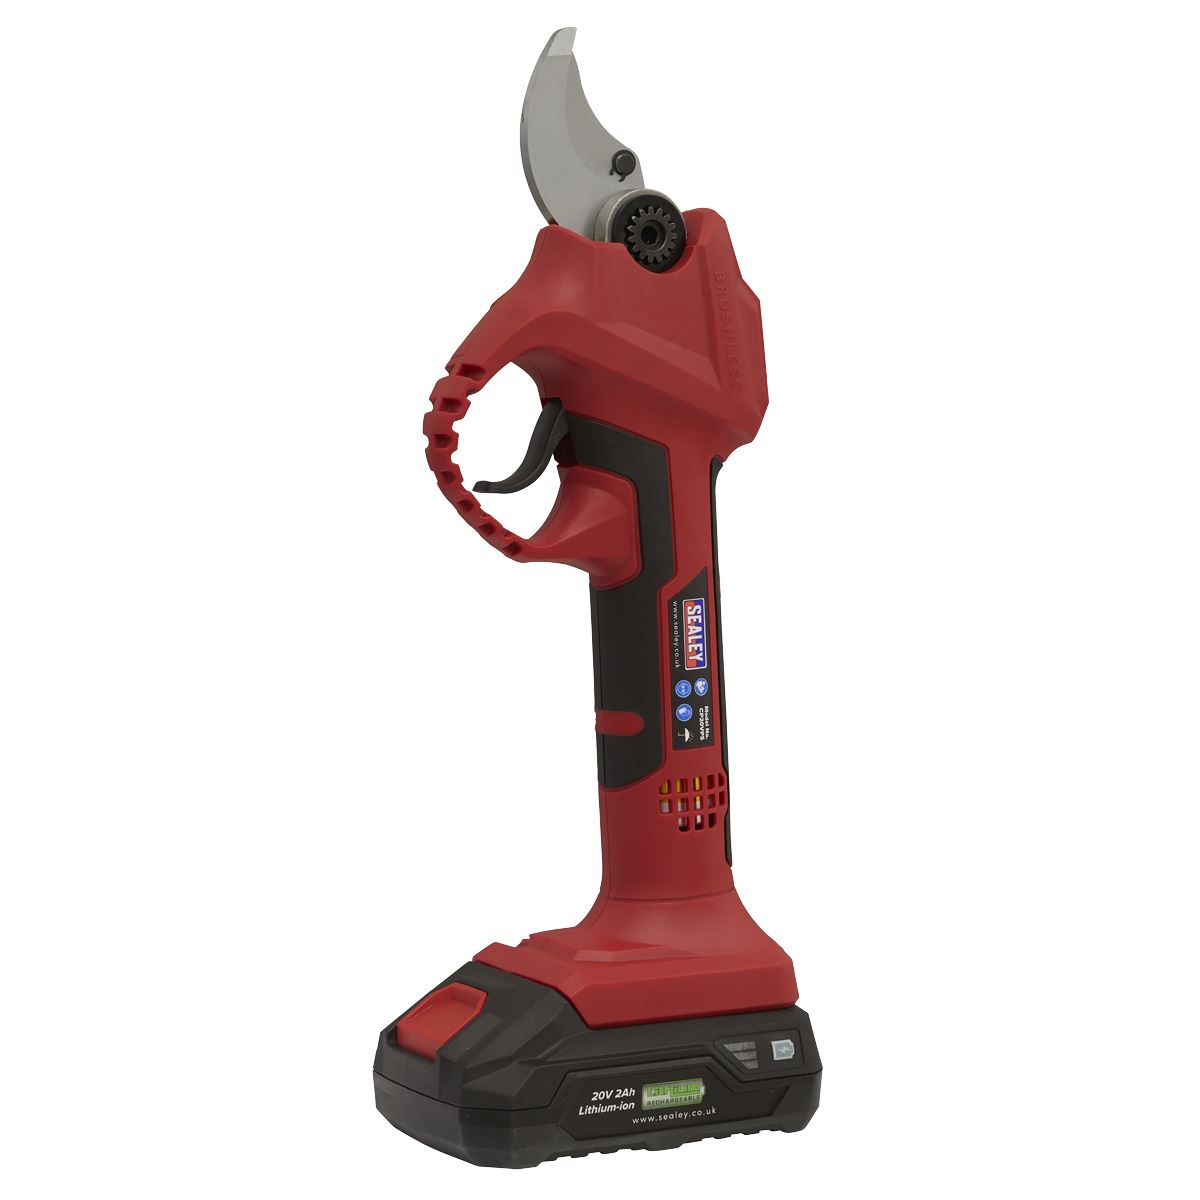 Sealey Pruning Shears Cordless 20V SV20 Series - Body Only